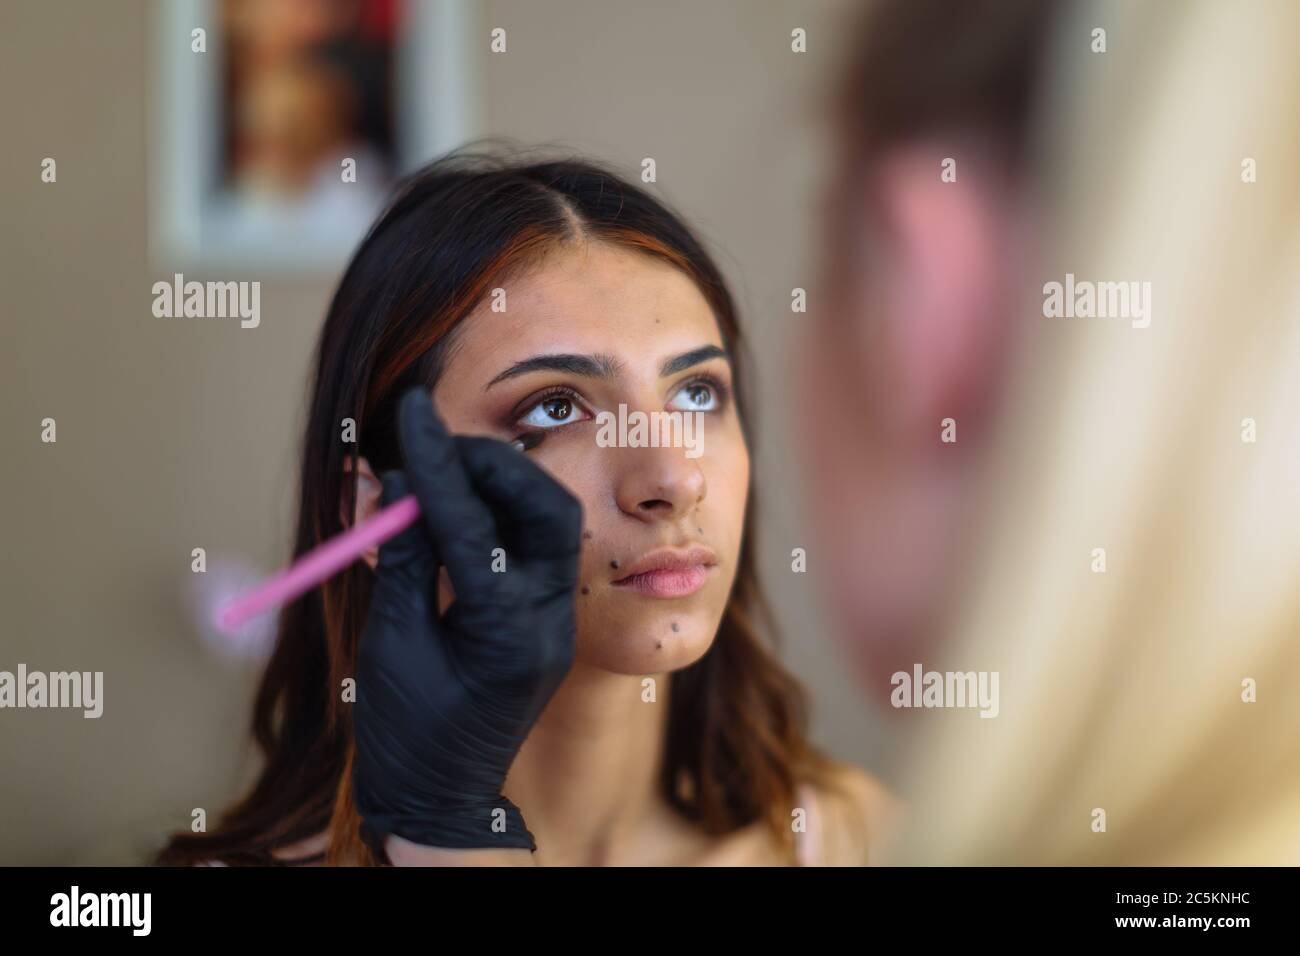 Makeup woman artist at work, professional in action with young model in beauty salon and creative classes Stock Photo